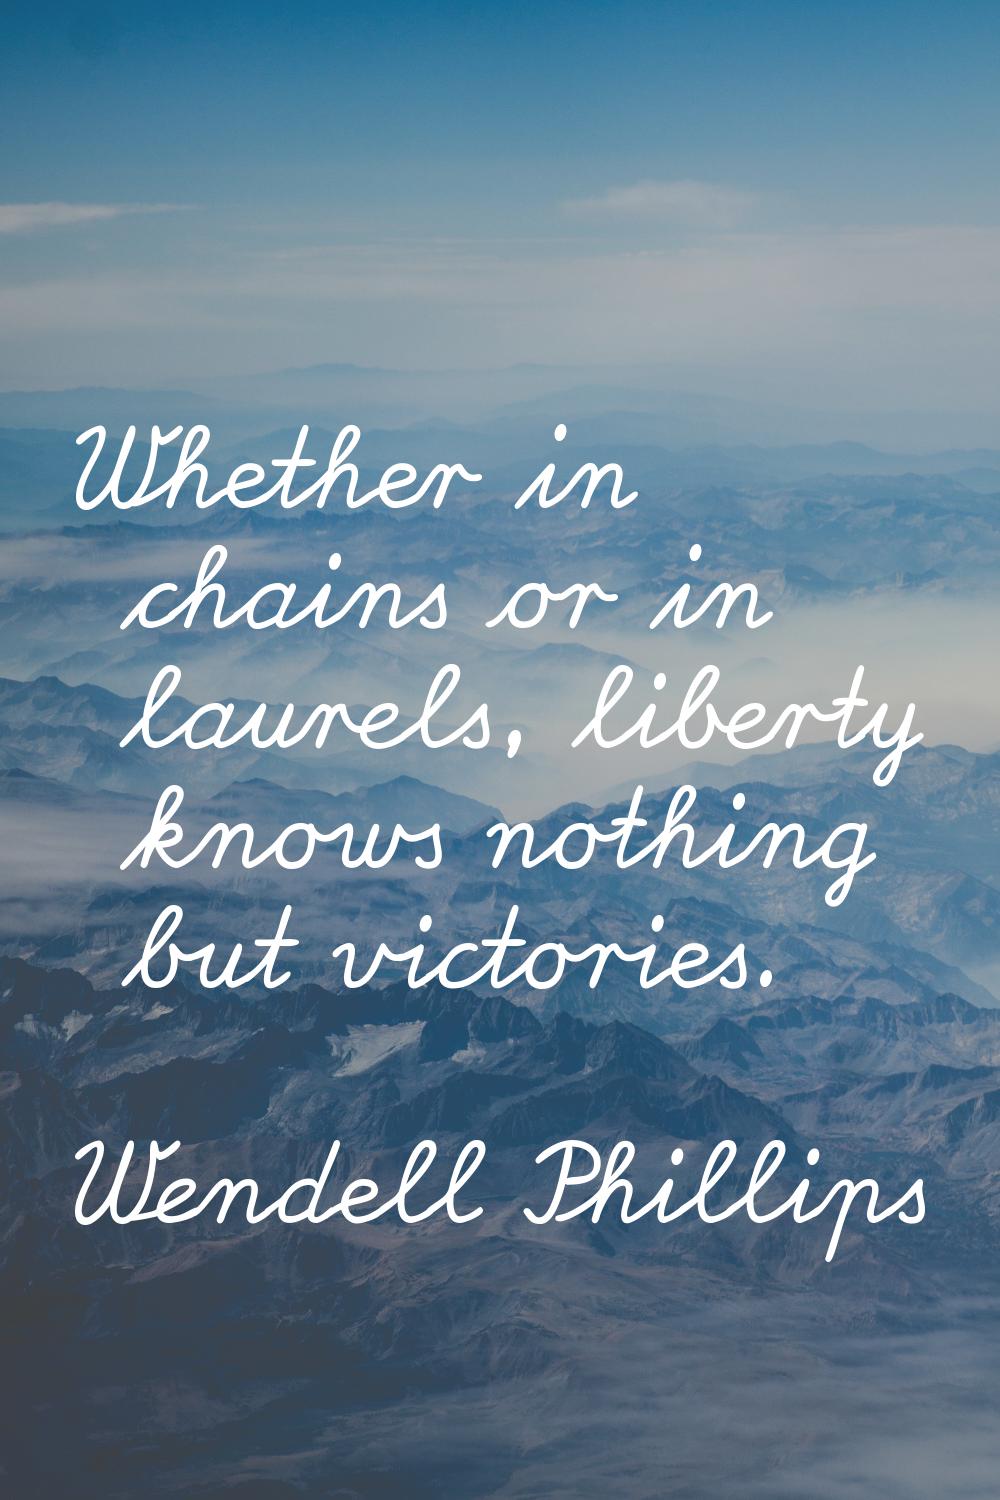 Whether in chains or in laurels, liberty knows nothing but victories.